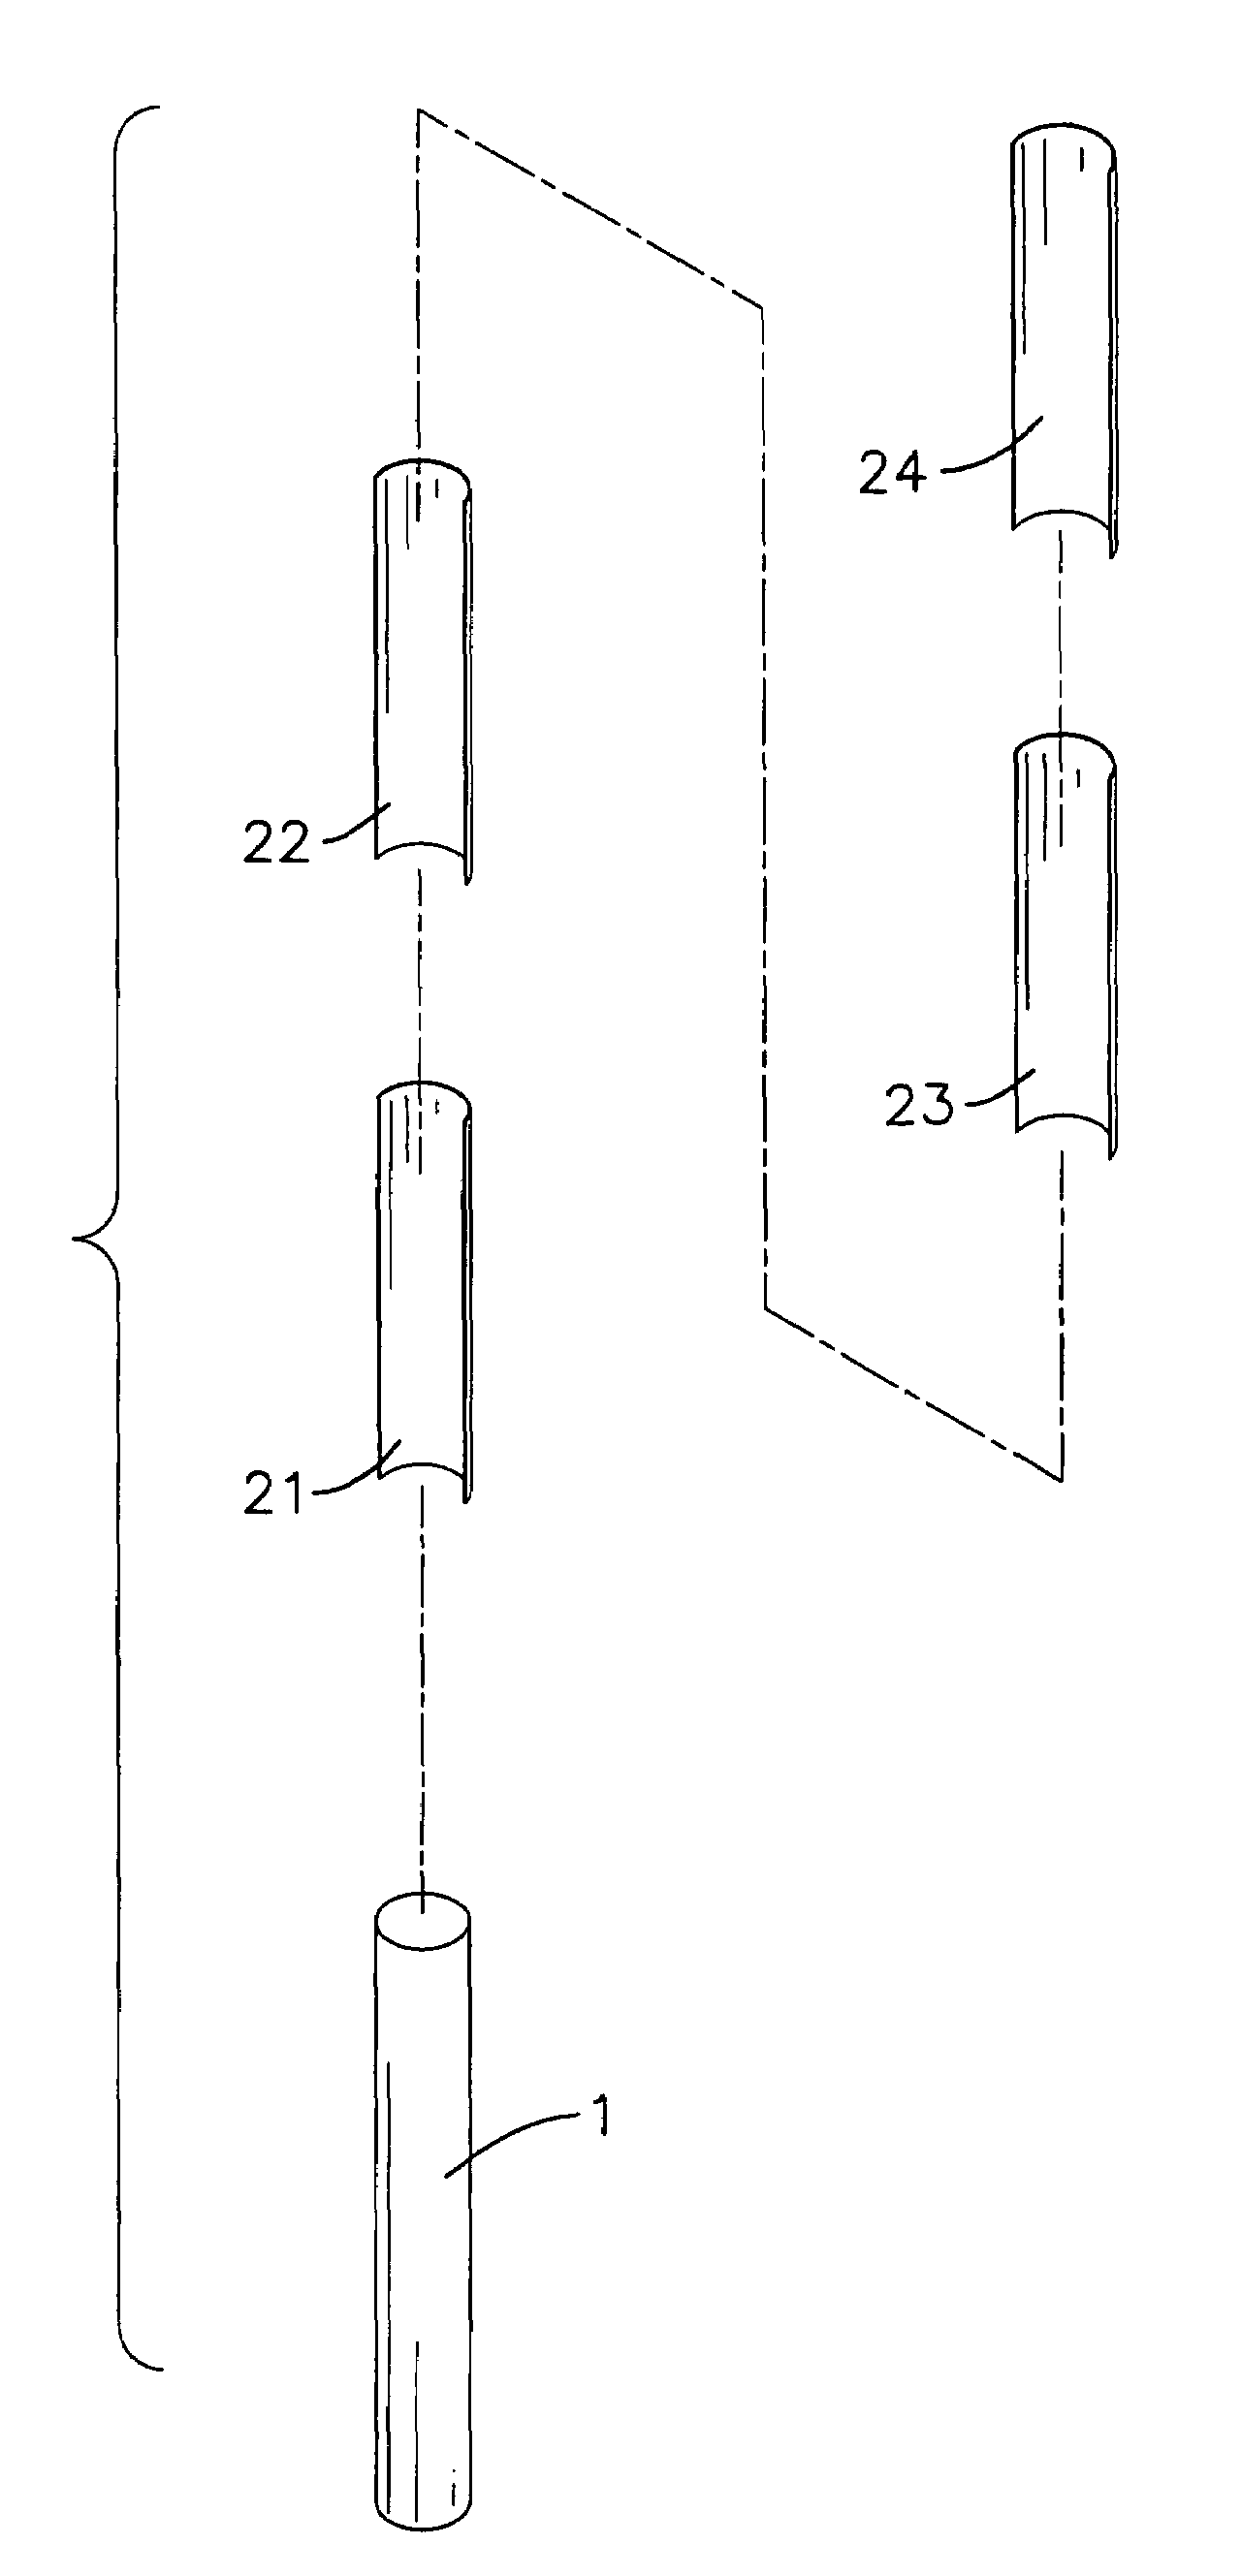 Positioning device for dental implant